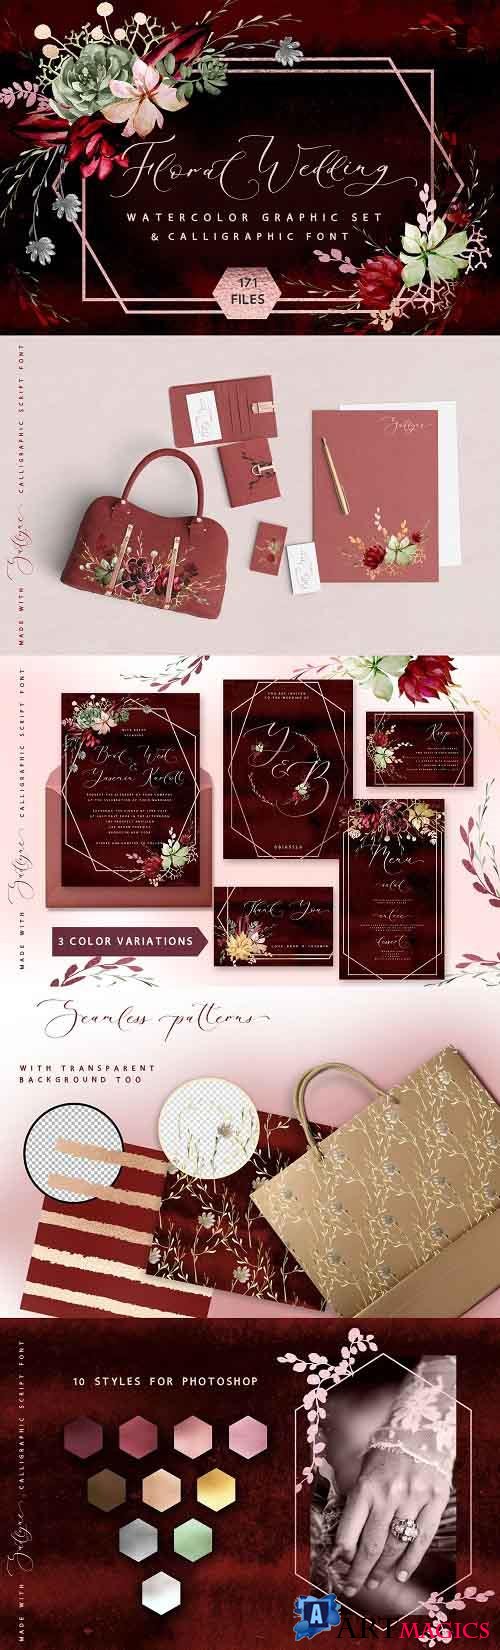 Rustic floral wedding graphic &fonts - 4578893